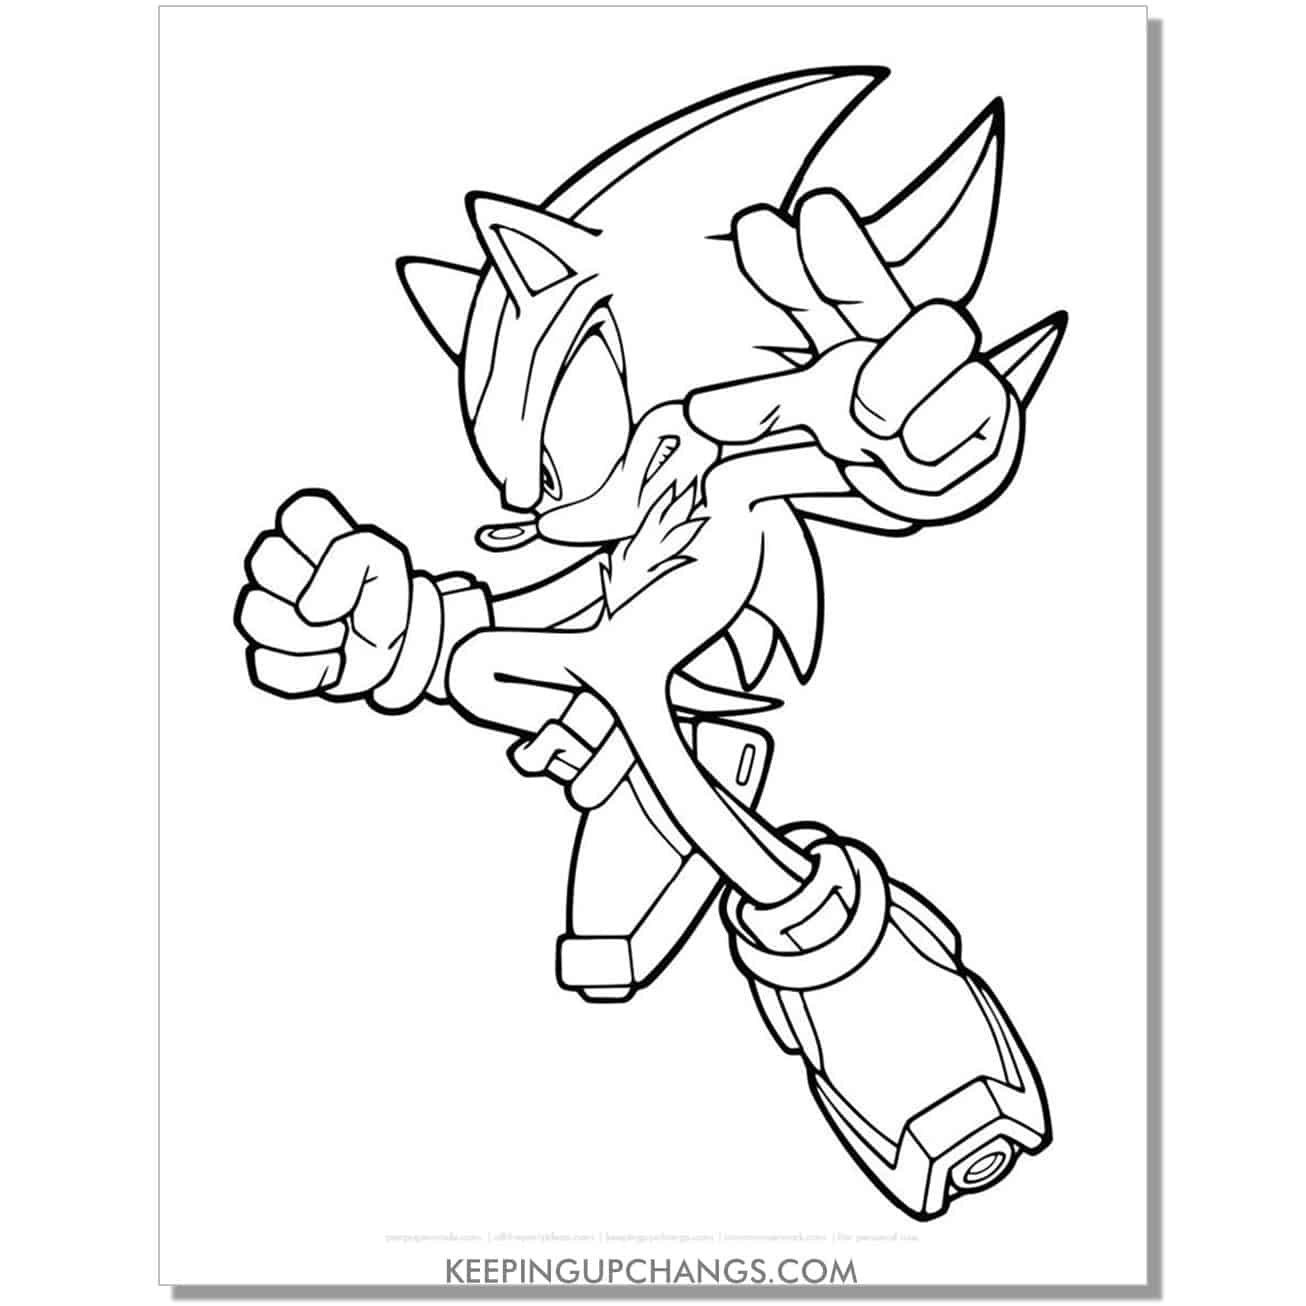 shadow sonic with fist getting ready to attack coloring page.